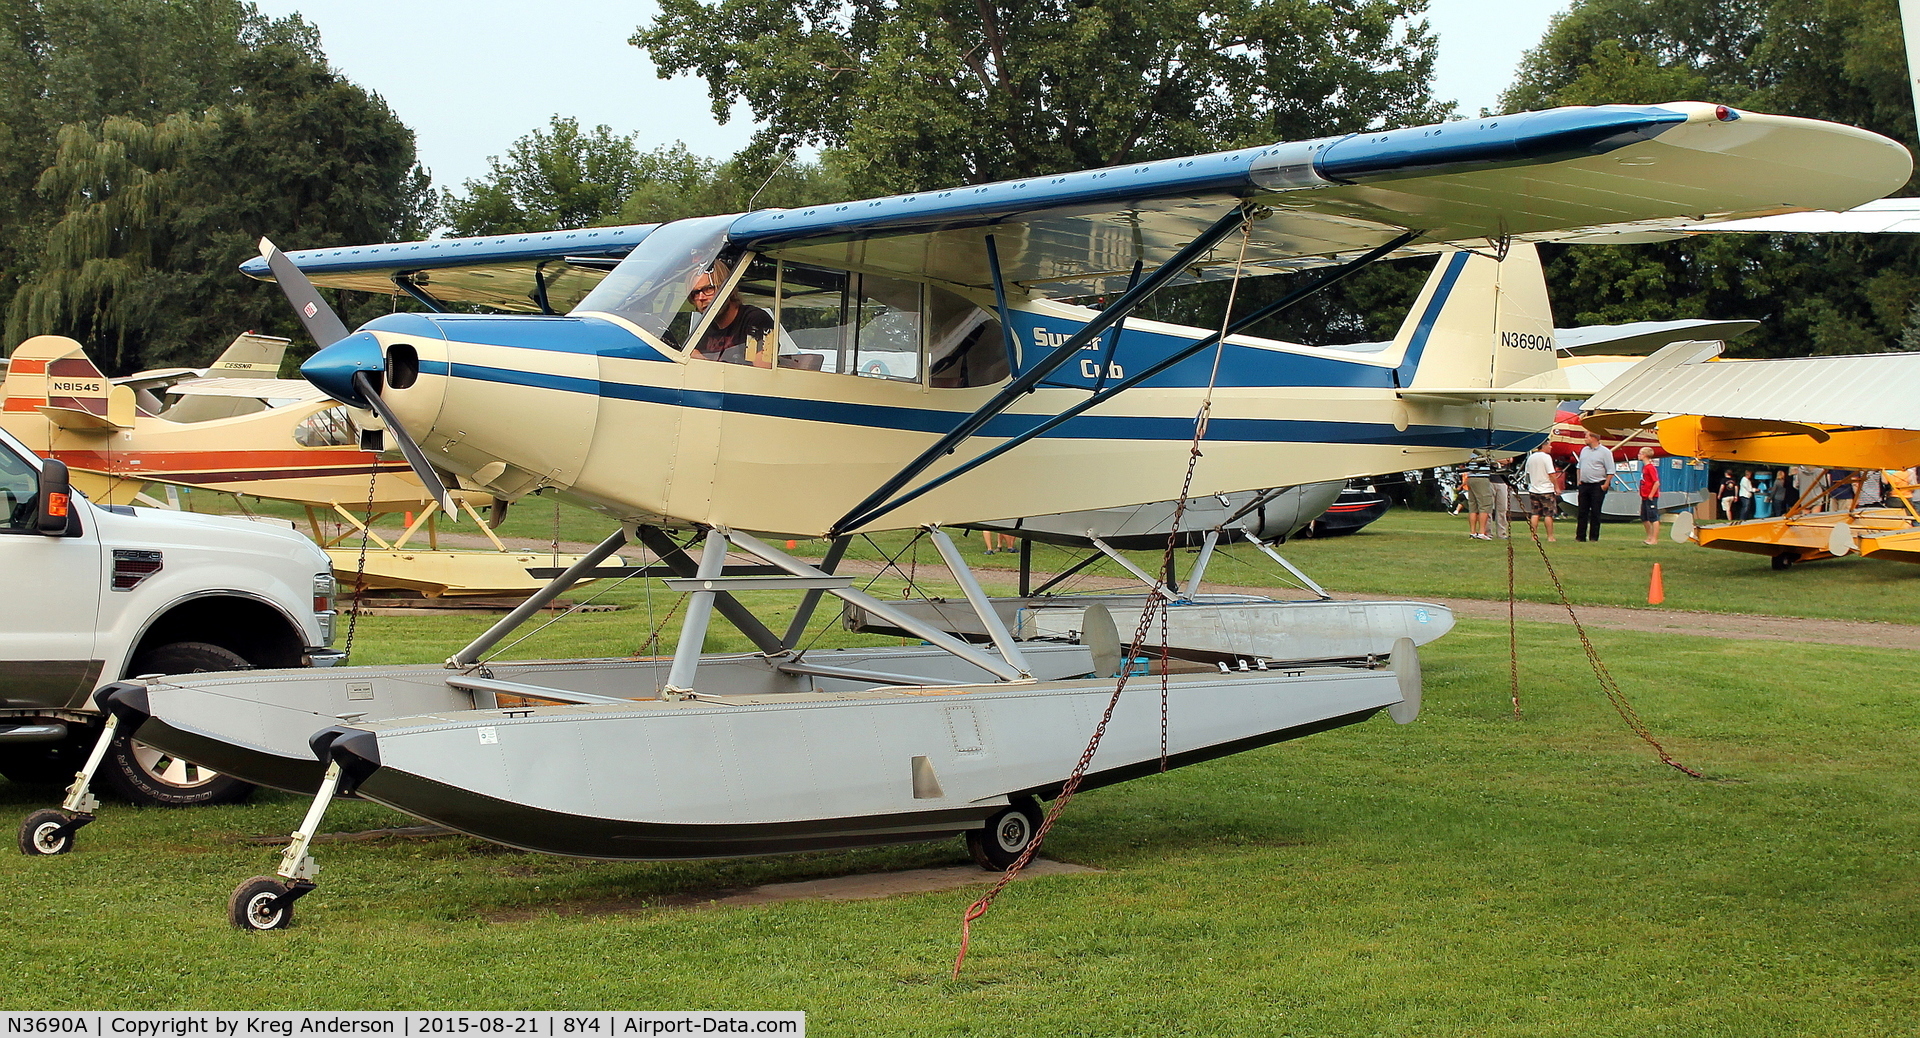 N3690A, Piper PA-18A-150 Super Cub C/N 18-3038, Hog Roast for AOPA Minneapolis Fly-in at Surfside Seaplane Base